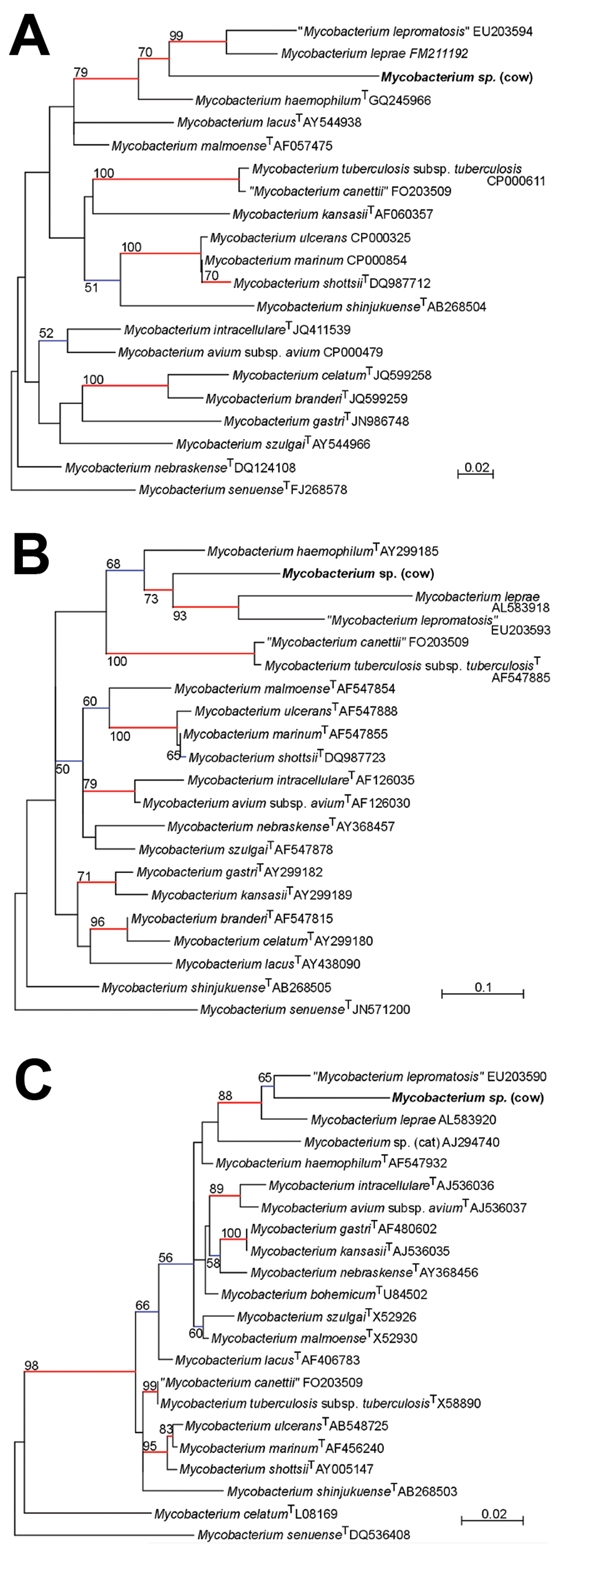 A) Phylogenetic trees based on partial A) β-subunit of RNA polymerase, B) partial heat shock protein 65 sequences, and C) partial 16S rRNA gene sequences of Mycobacterium spp., Jura, France. Phylogenies were inferred by using PhyML (http://code.google.com/p/phyml/) with the general time reversible evolutionary model (7). Trees were rooted by using M. setuense as an outgroup. Strains isolated in this study are indicated in bold. Values along the branches are bootstrap values (bootstrapped 1,000 t